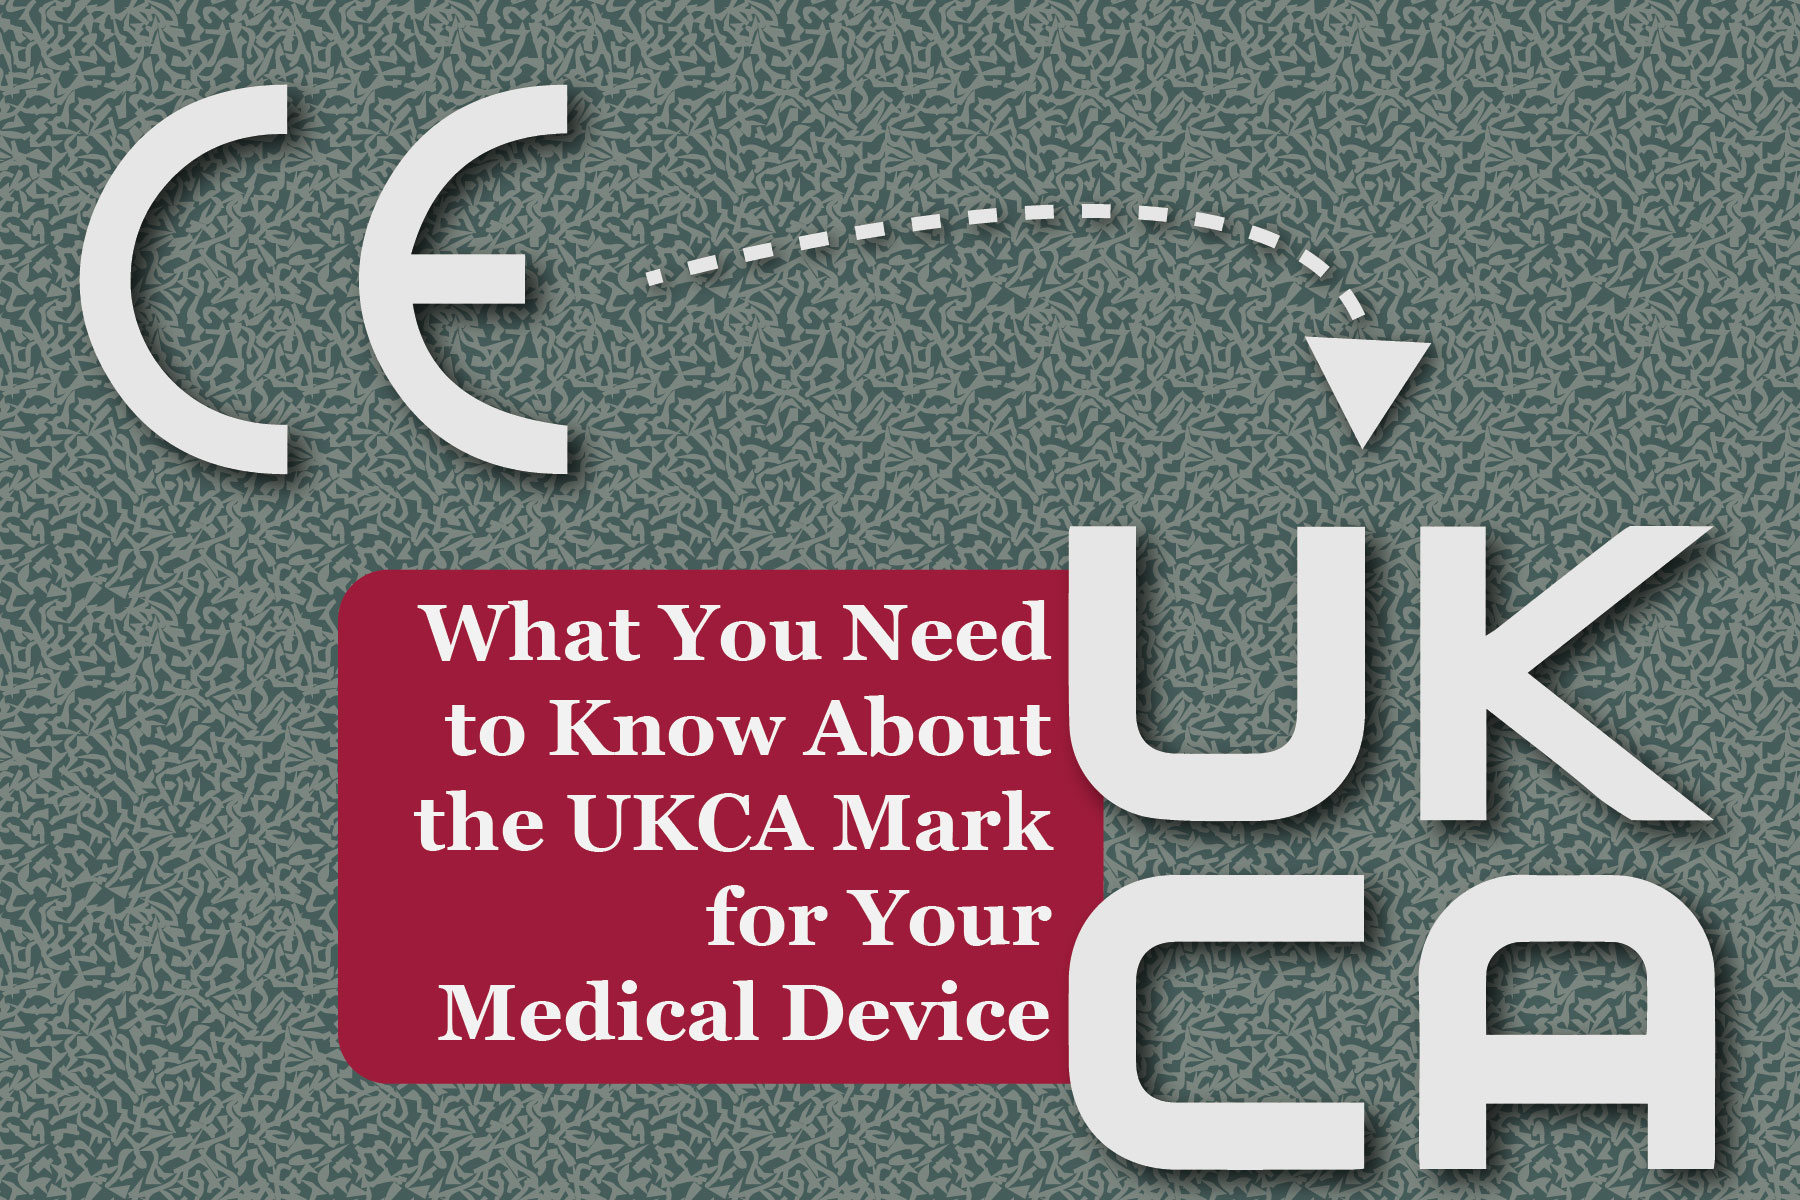 CE and UKCA marks for medical devices